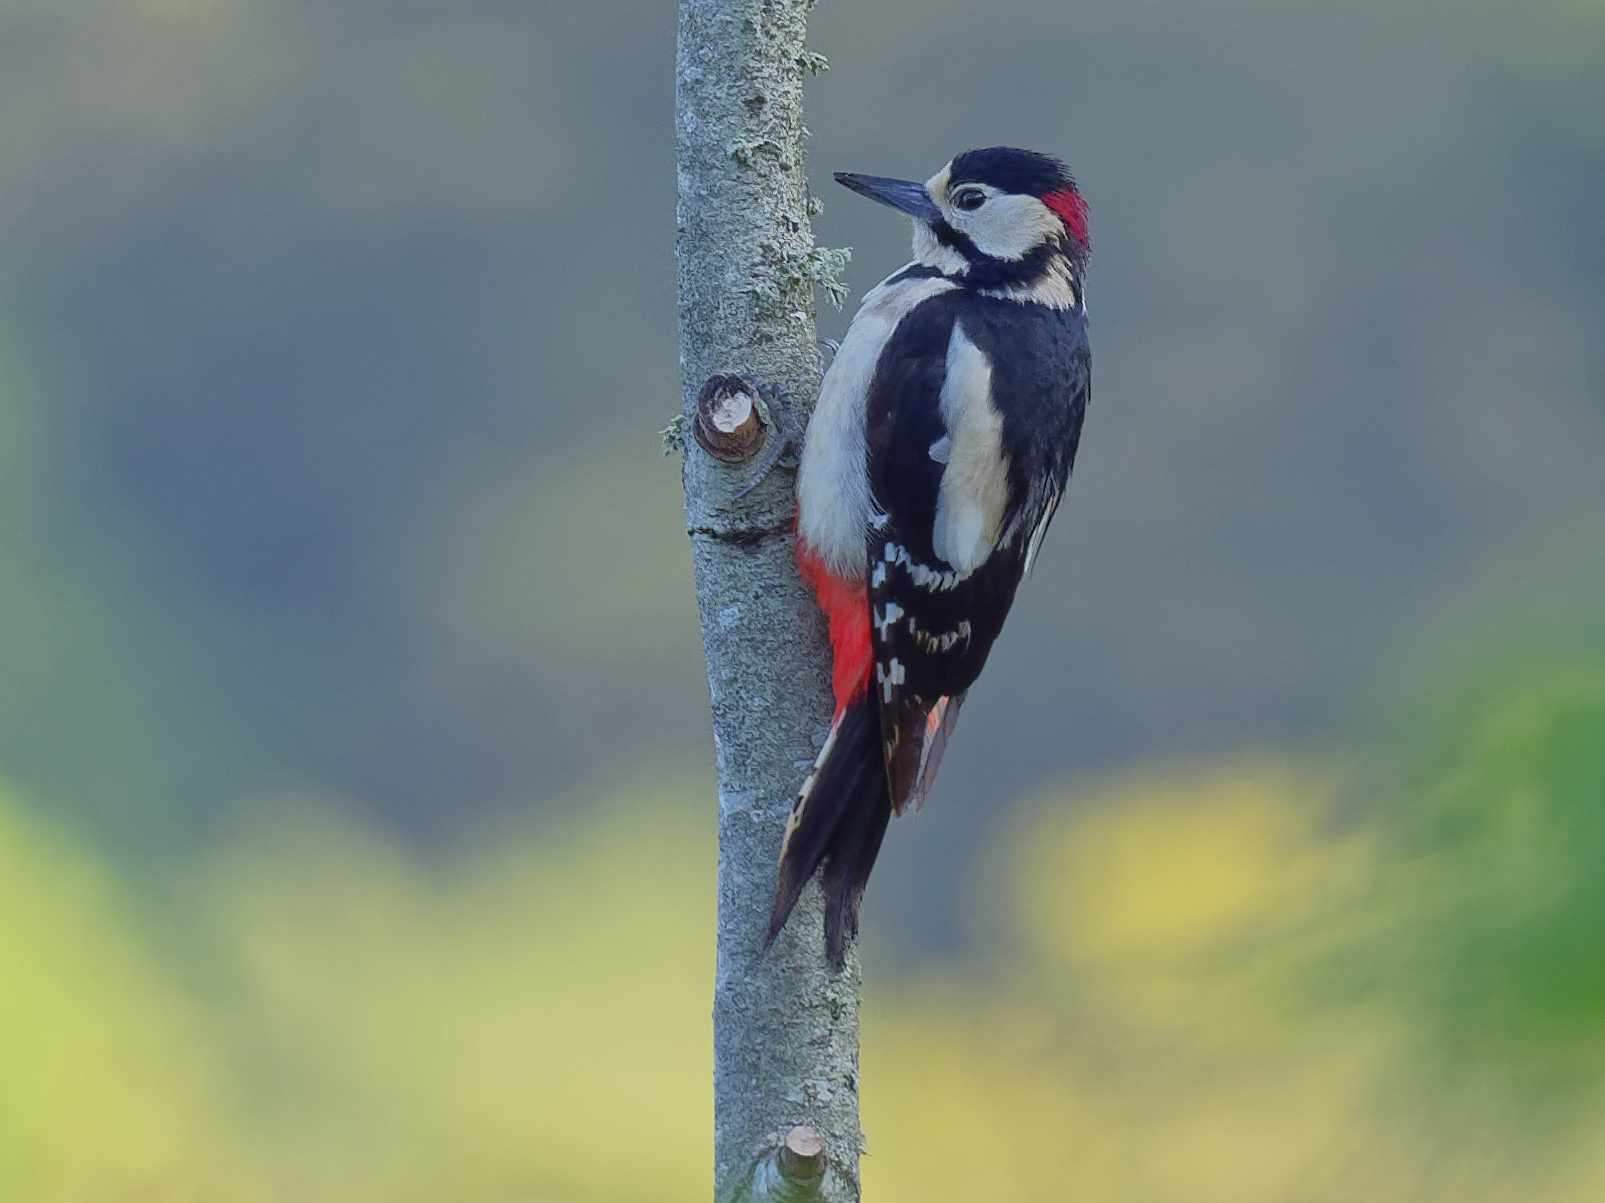 Great Spotted Woodpecker by Wayne Emery at Saltam